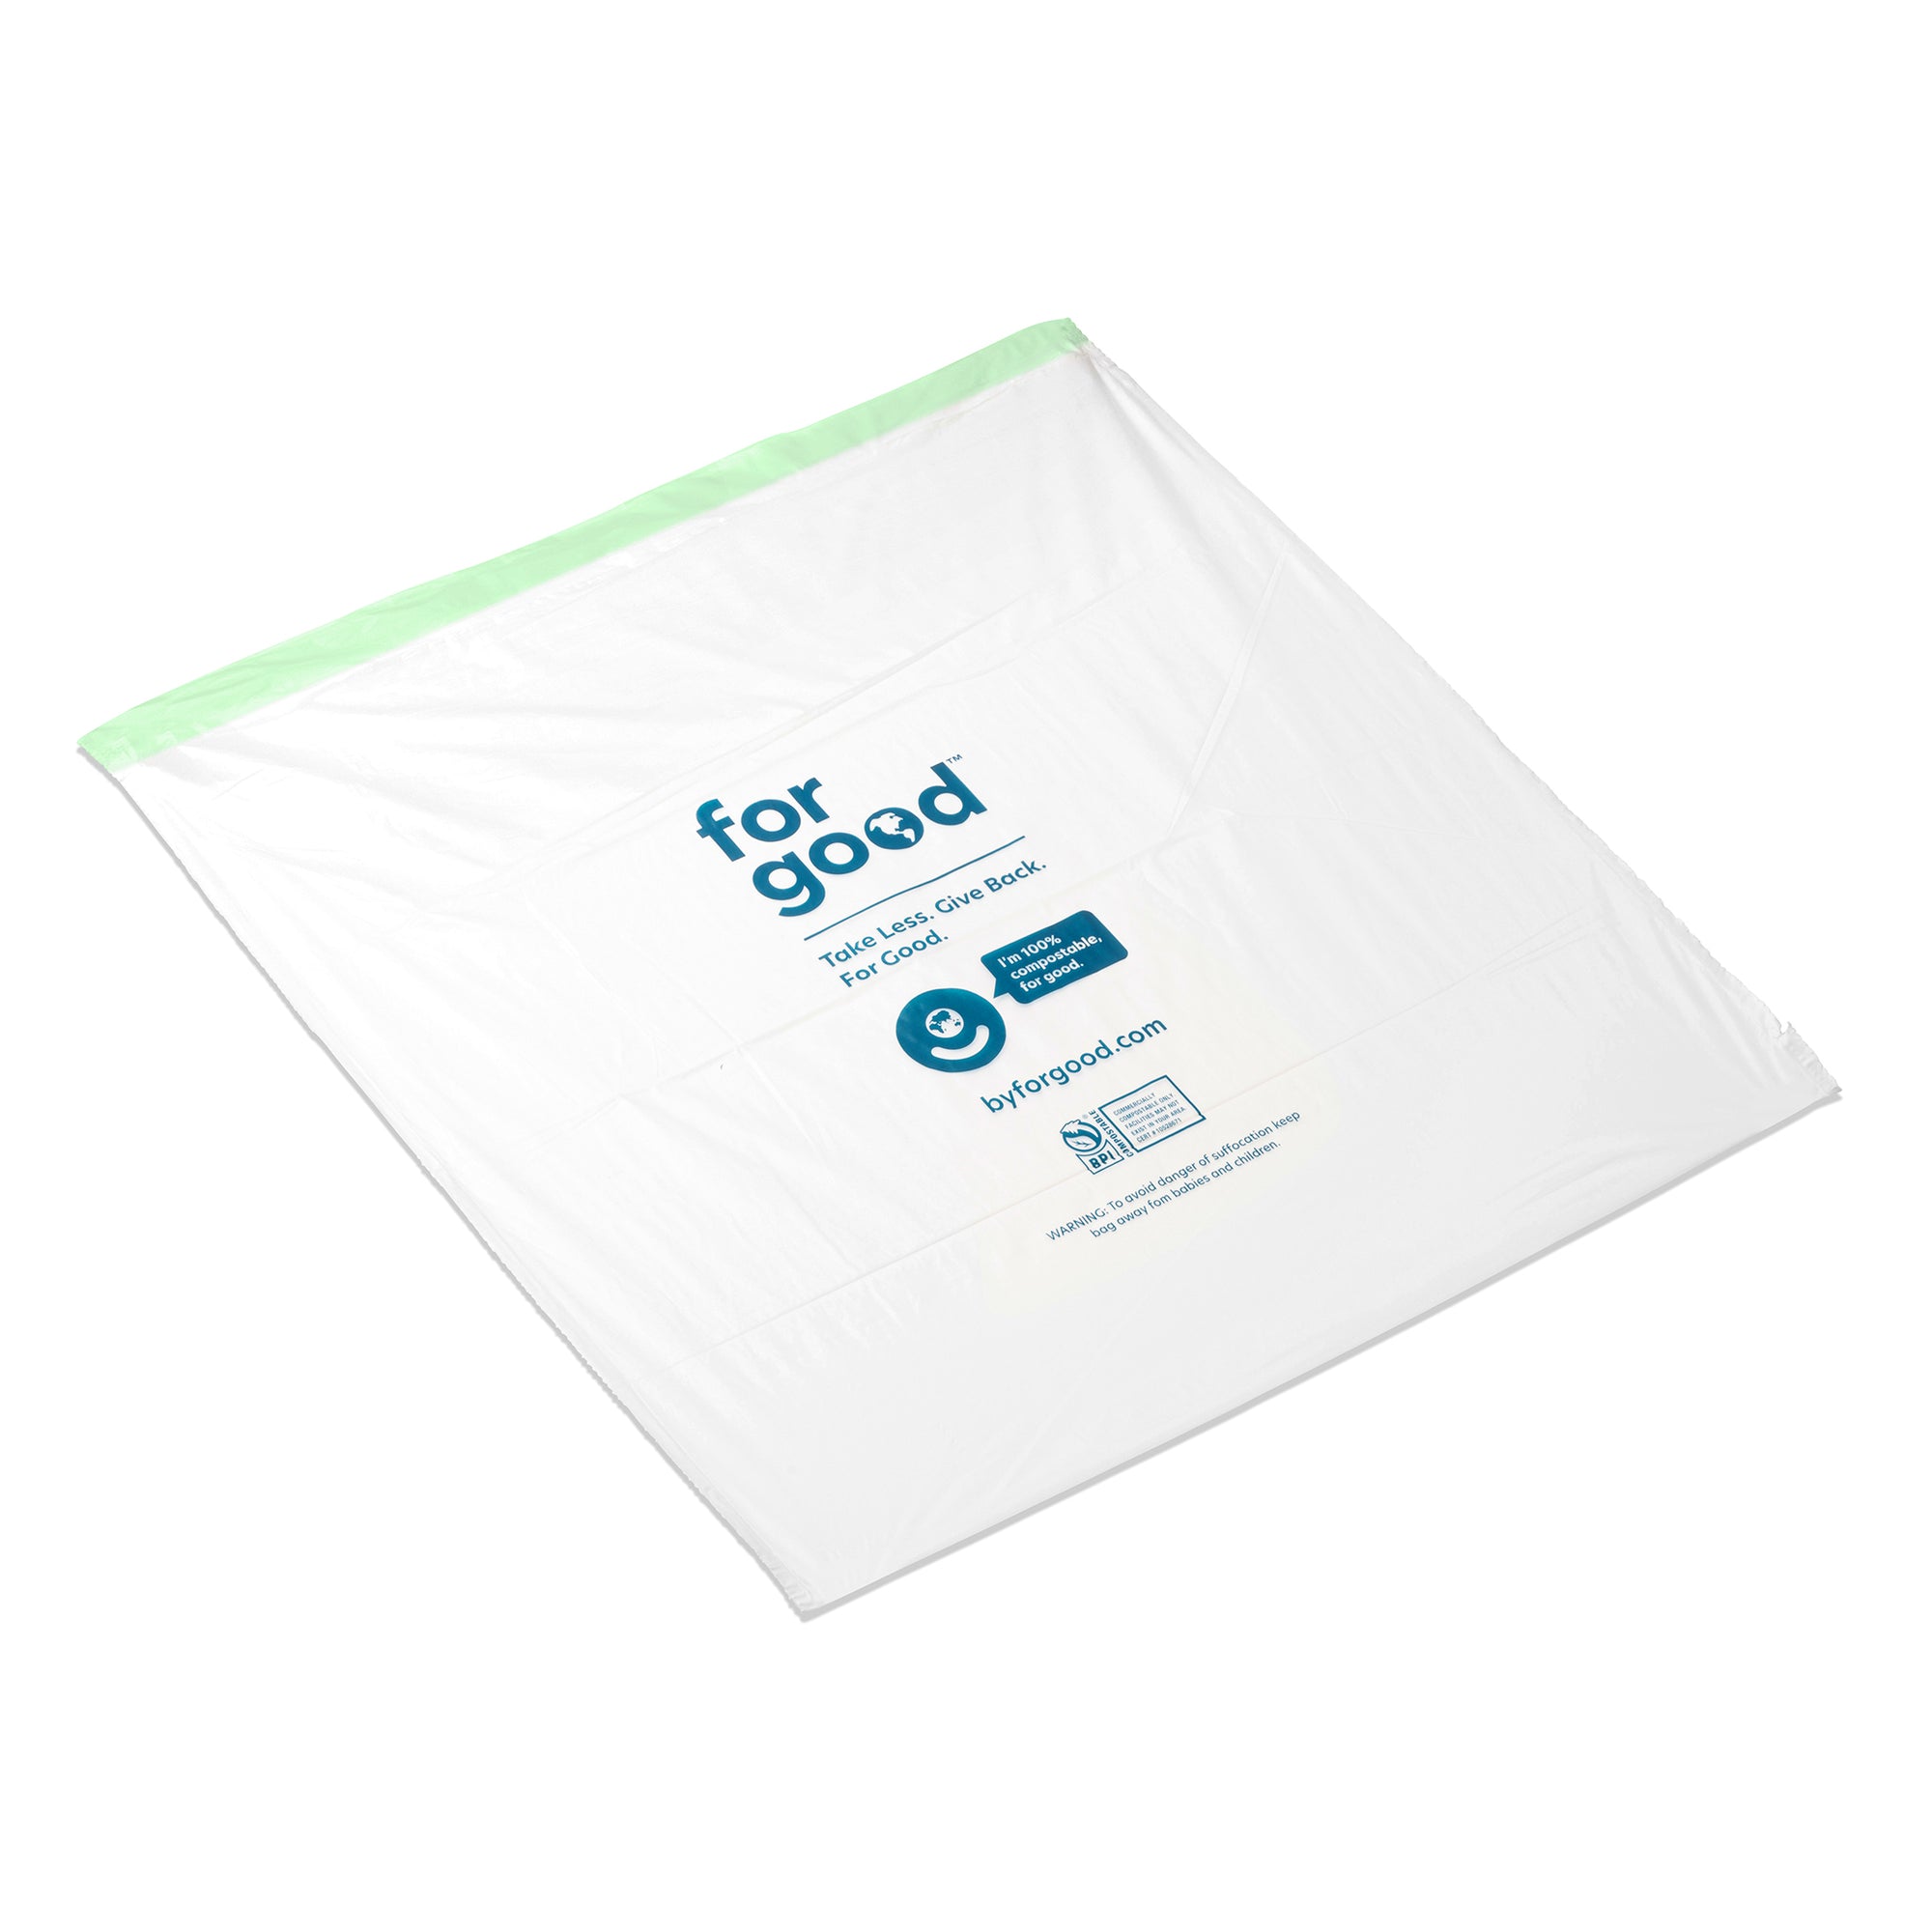  13-15 Gallon Biodegradable / Compostable Garbage Bags